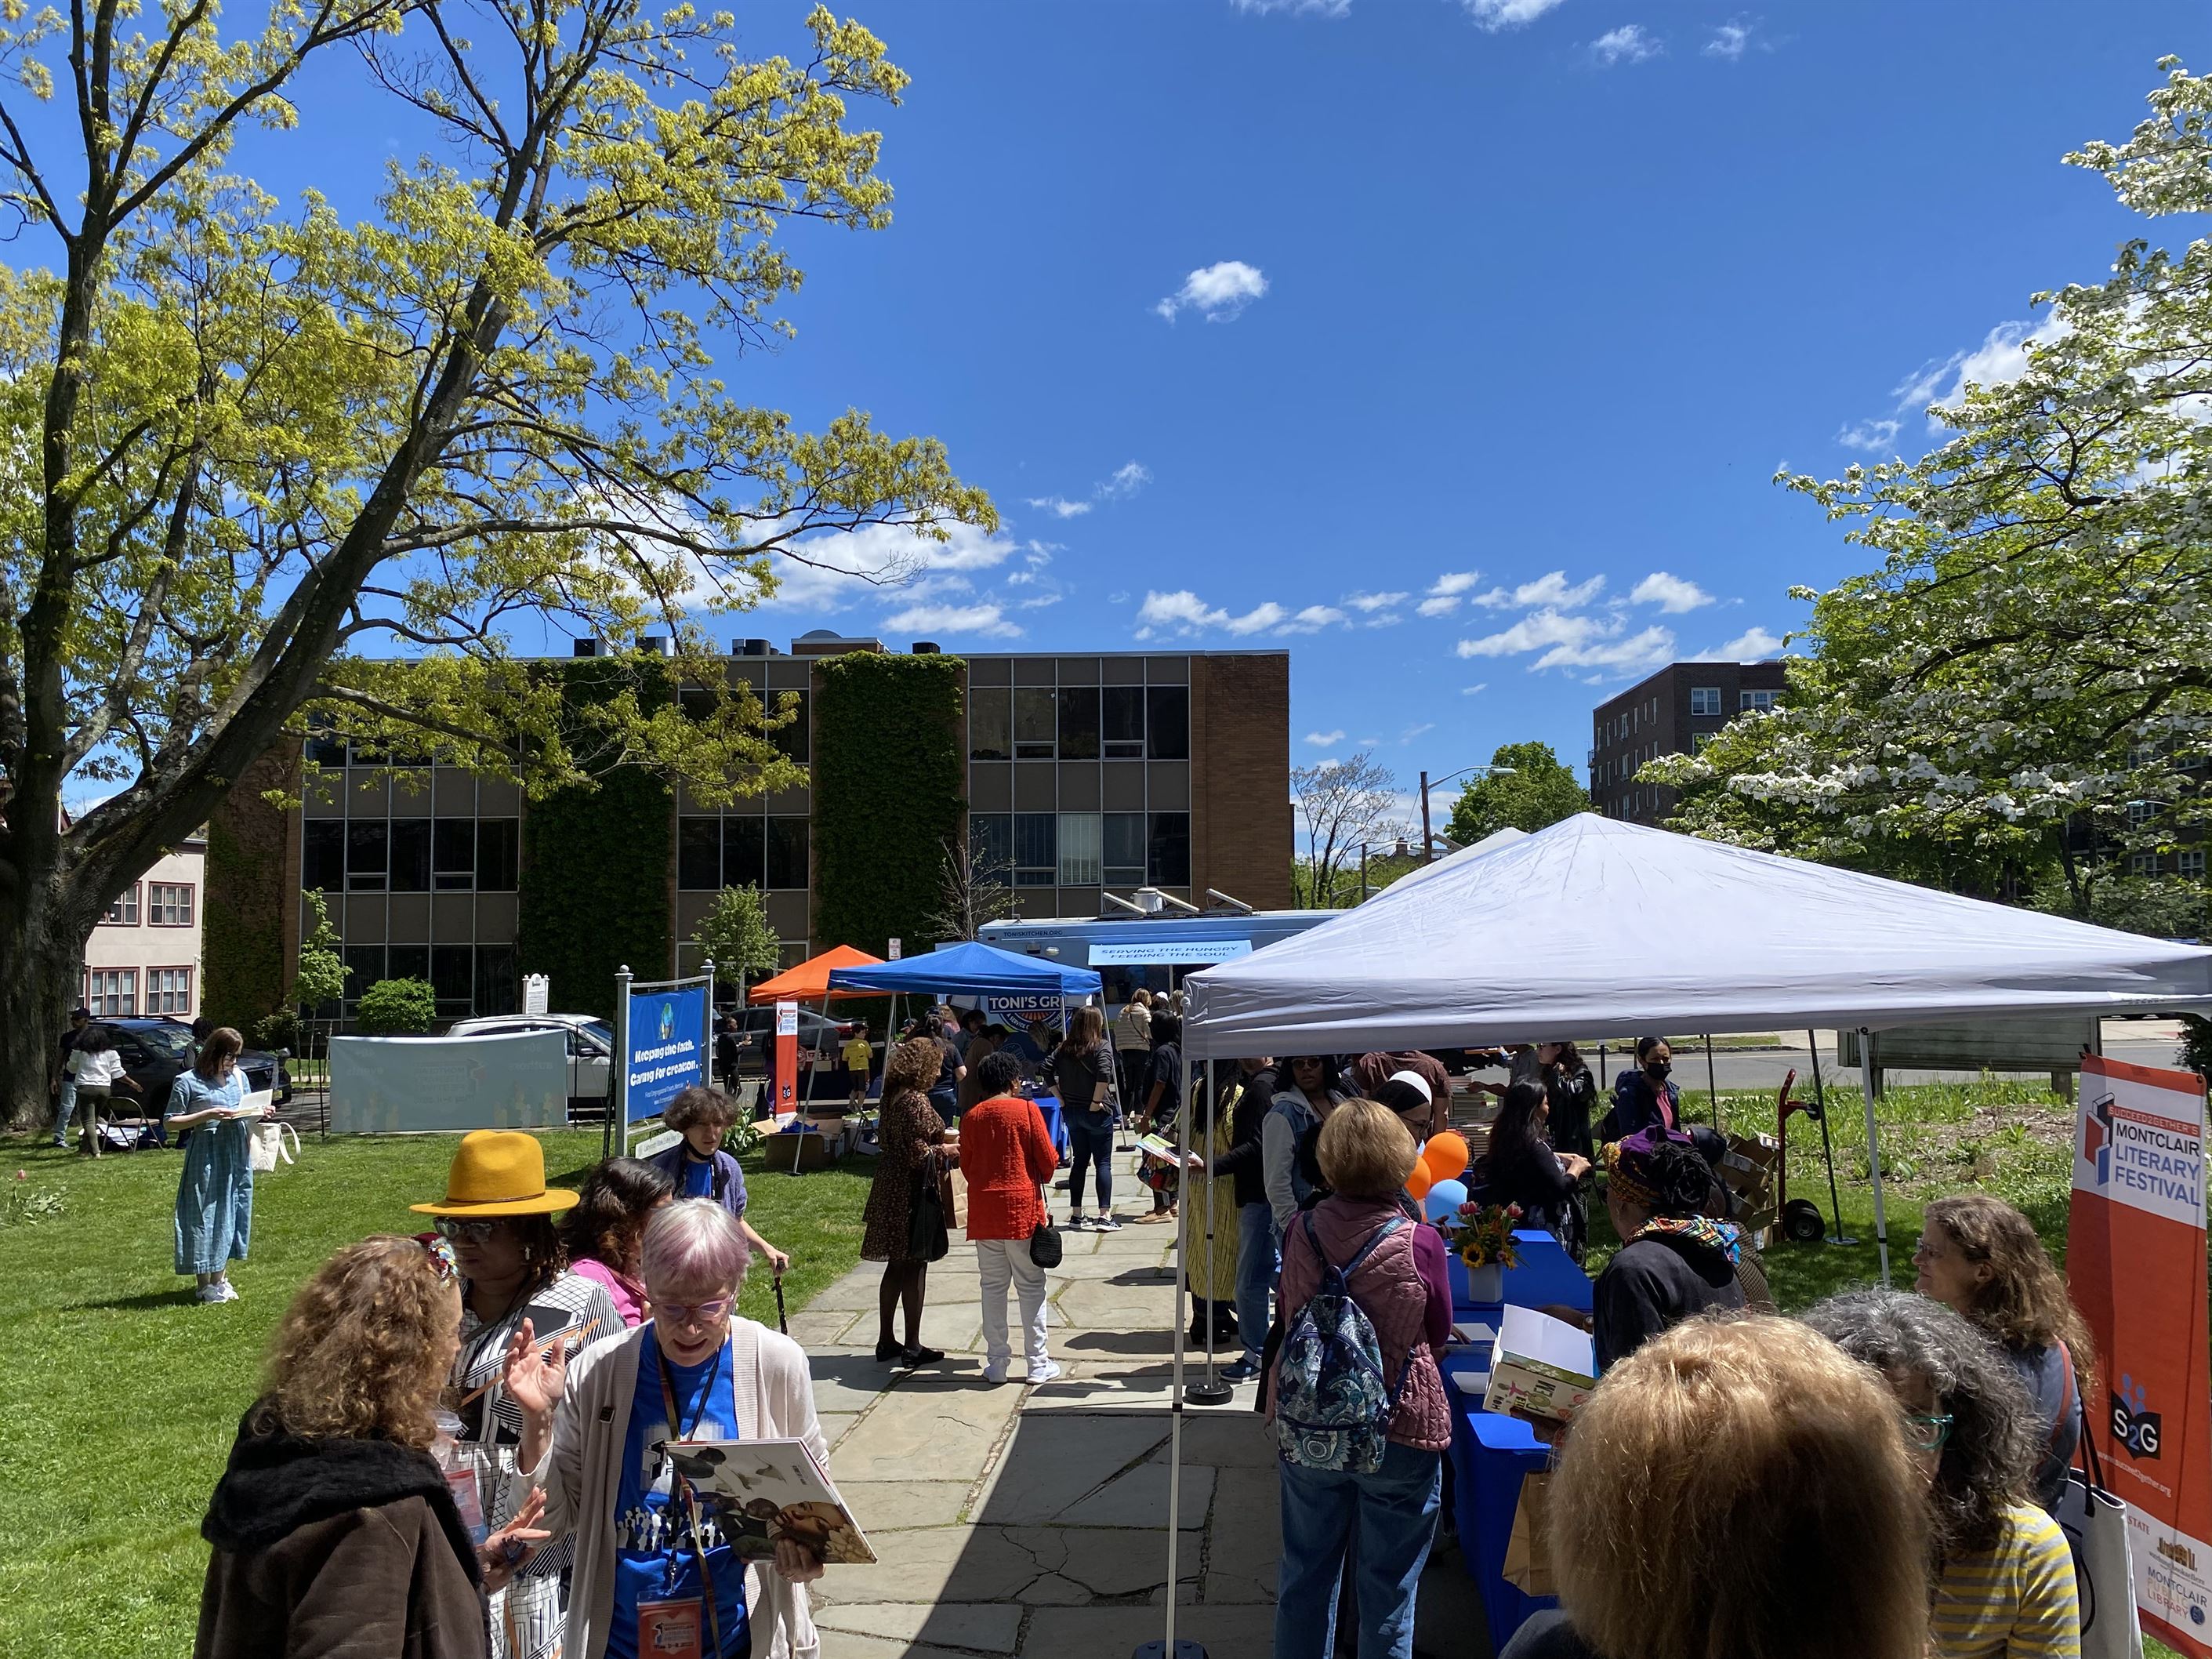 Local literary lovers came to the Montclair Literary Festival this past weekend to connect over books and writing.
Olivia Yayla | The Montclarion